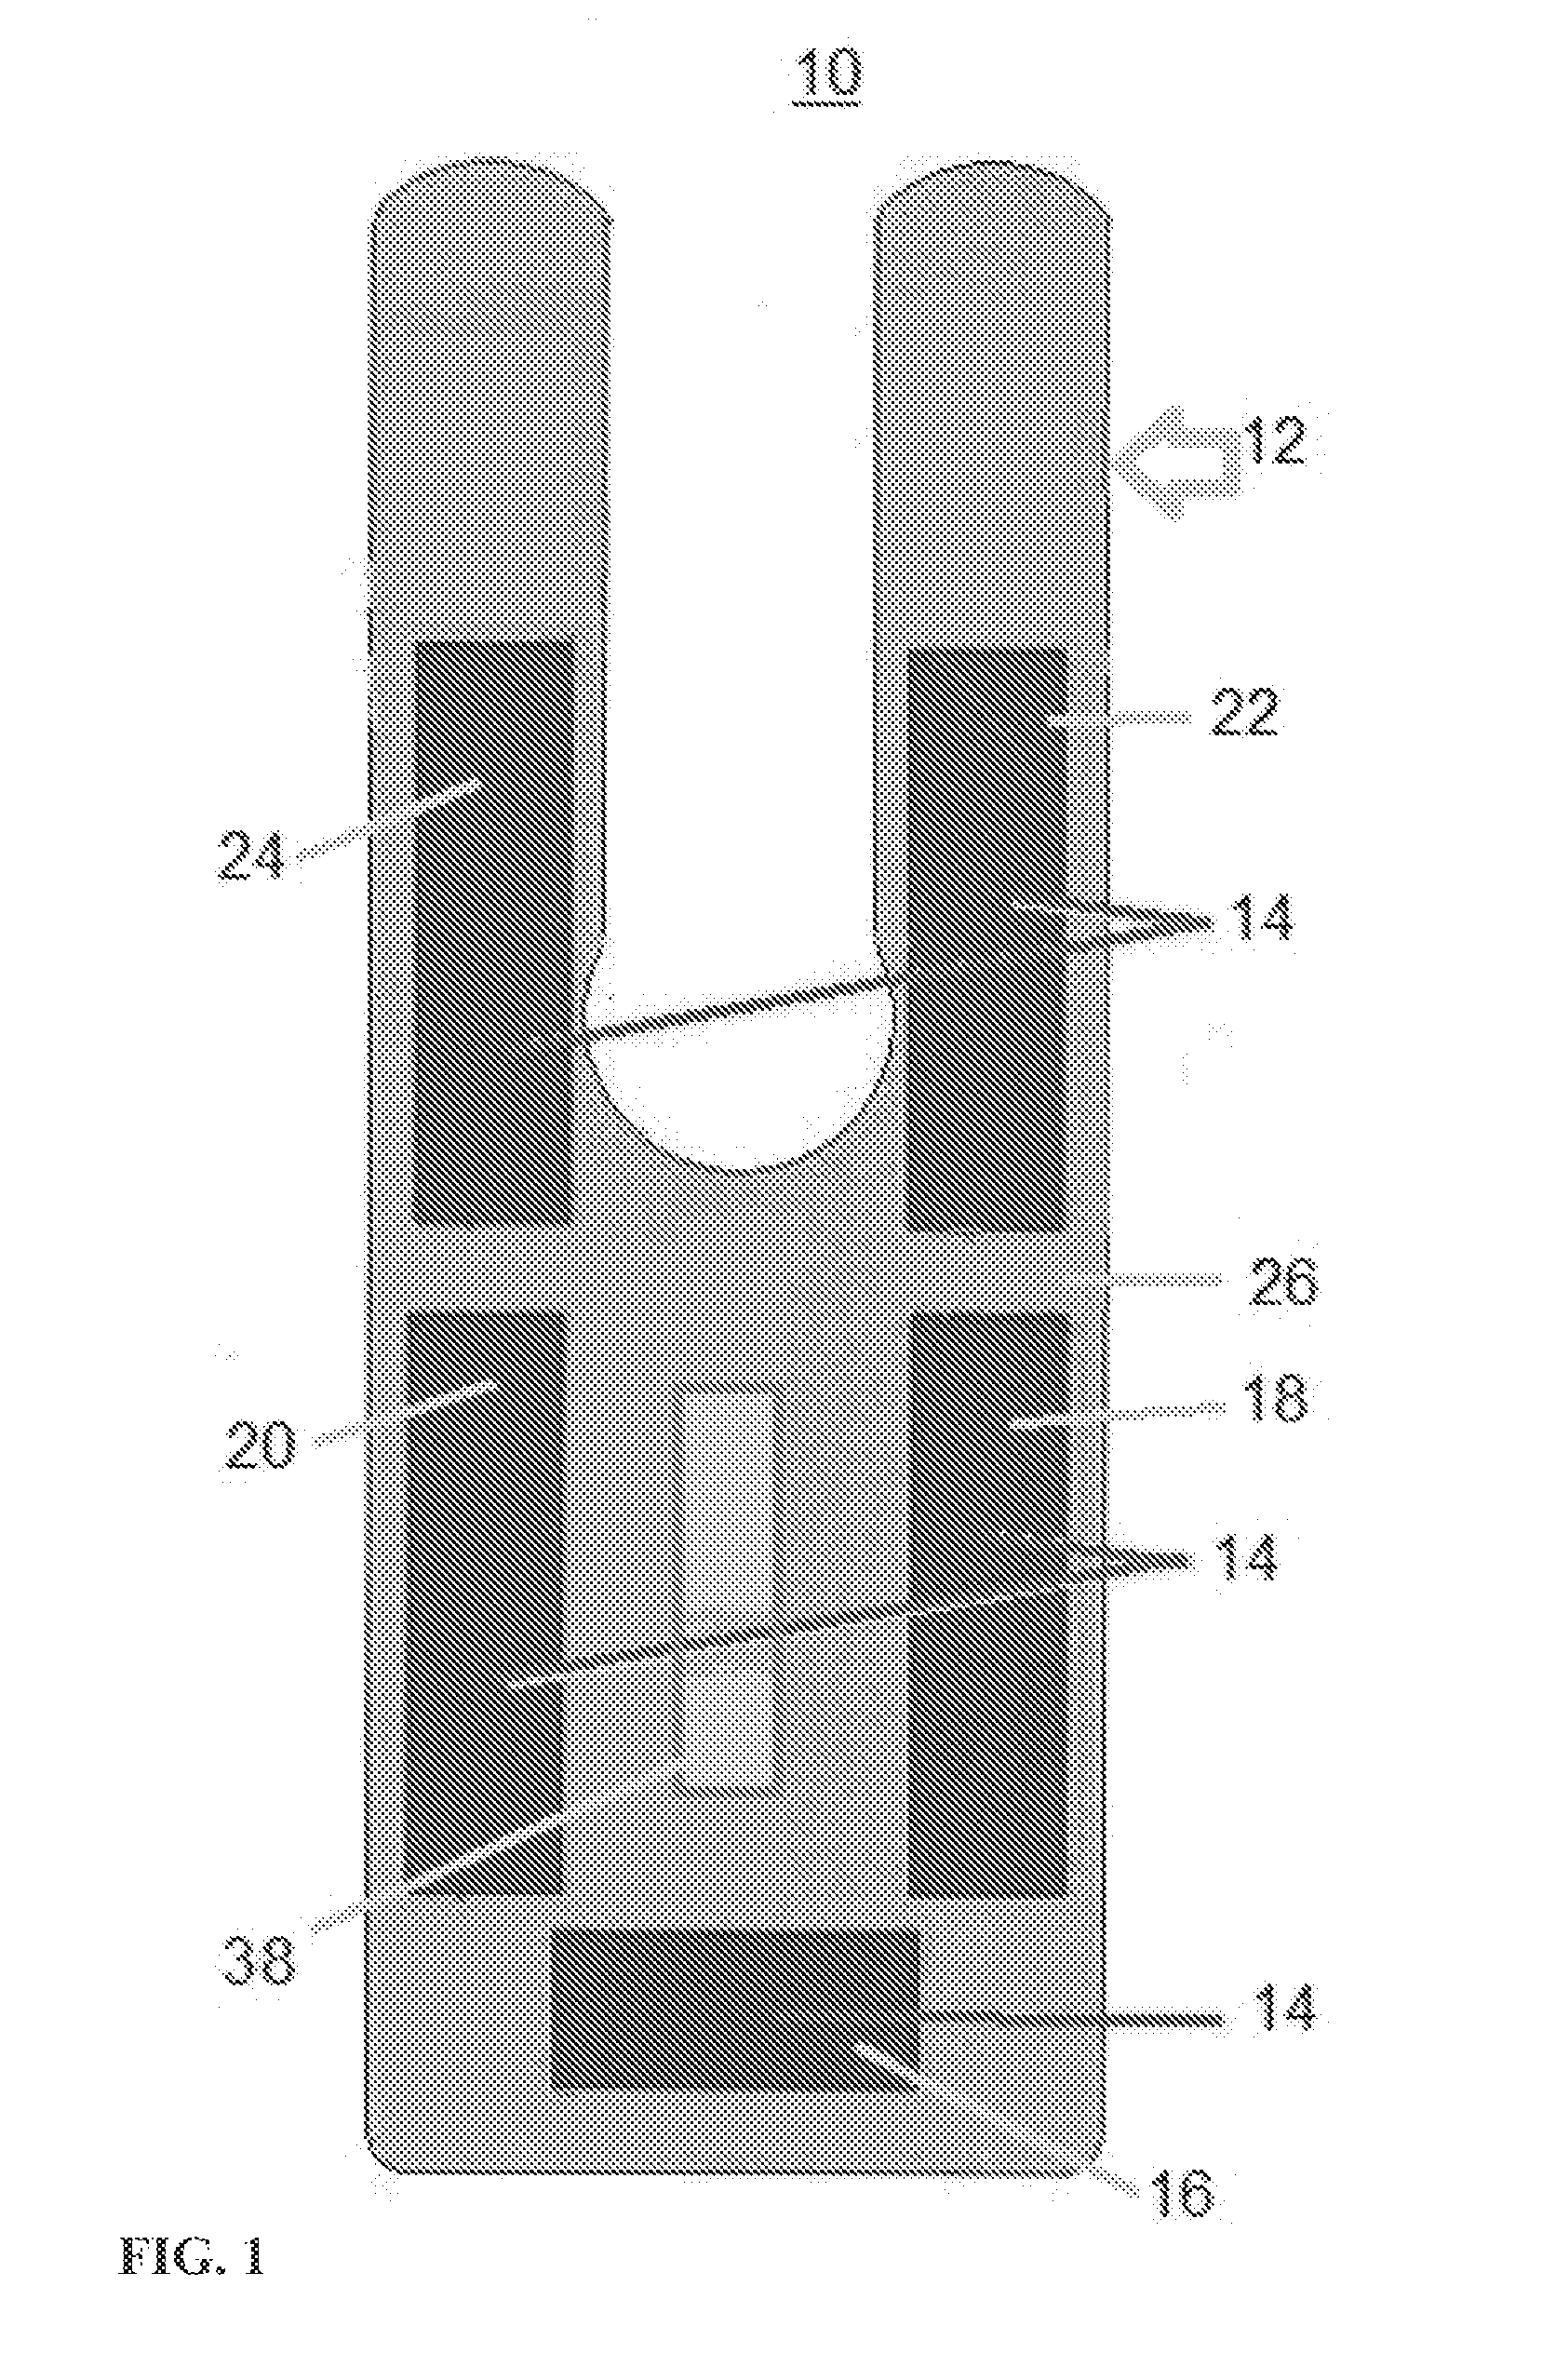 Device method and system for reducing anxiety in an individual